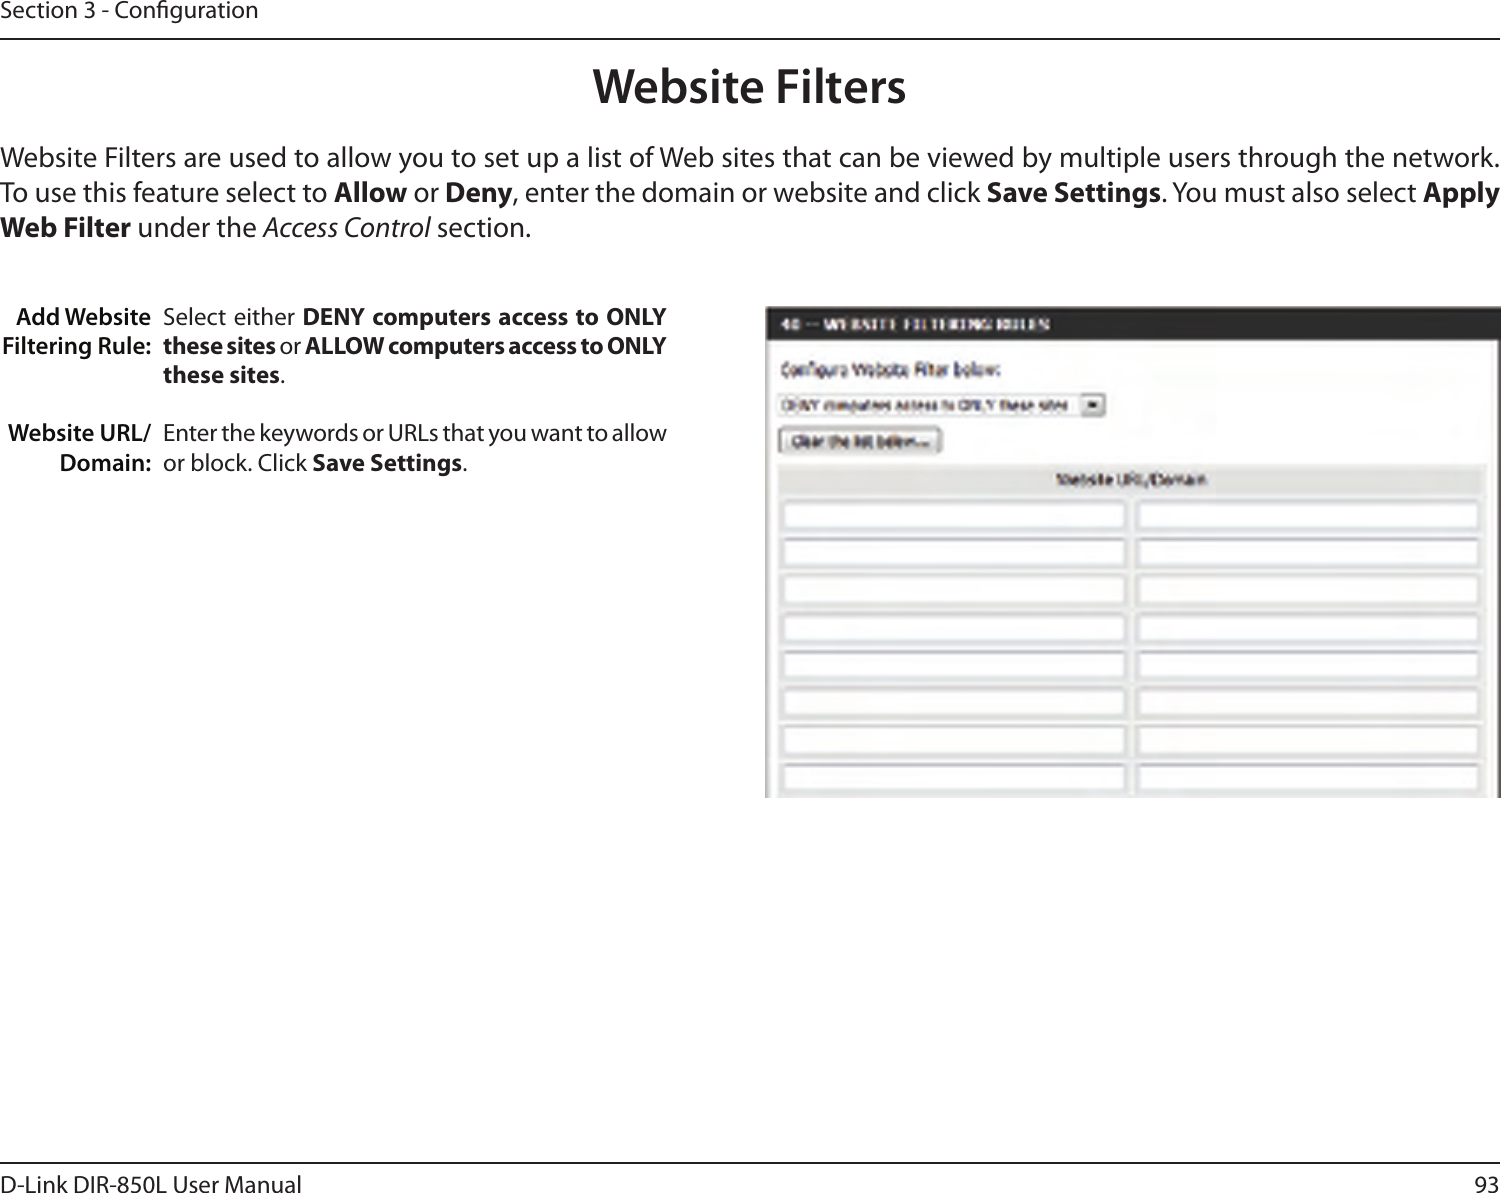 93D-Link DIR-850L User ManualSection 3 - CongurationAdd Website Filtering Rule:Website URL/Domain:Website FiltersSelect either DENY computers access to ONLY these sites or ALLOW computers access to ONLY these sites.Enter the keywords or URLs that you want to allow or block. Click Save Settings.Website Filters are used to allow you to set up a list of Web sites that can be viewed by multiple users through the network. To use this feature select to Allow or Deny, enter the domain or website and click Save Settings. You must also select Apply Web Filter under the Access Control section.